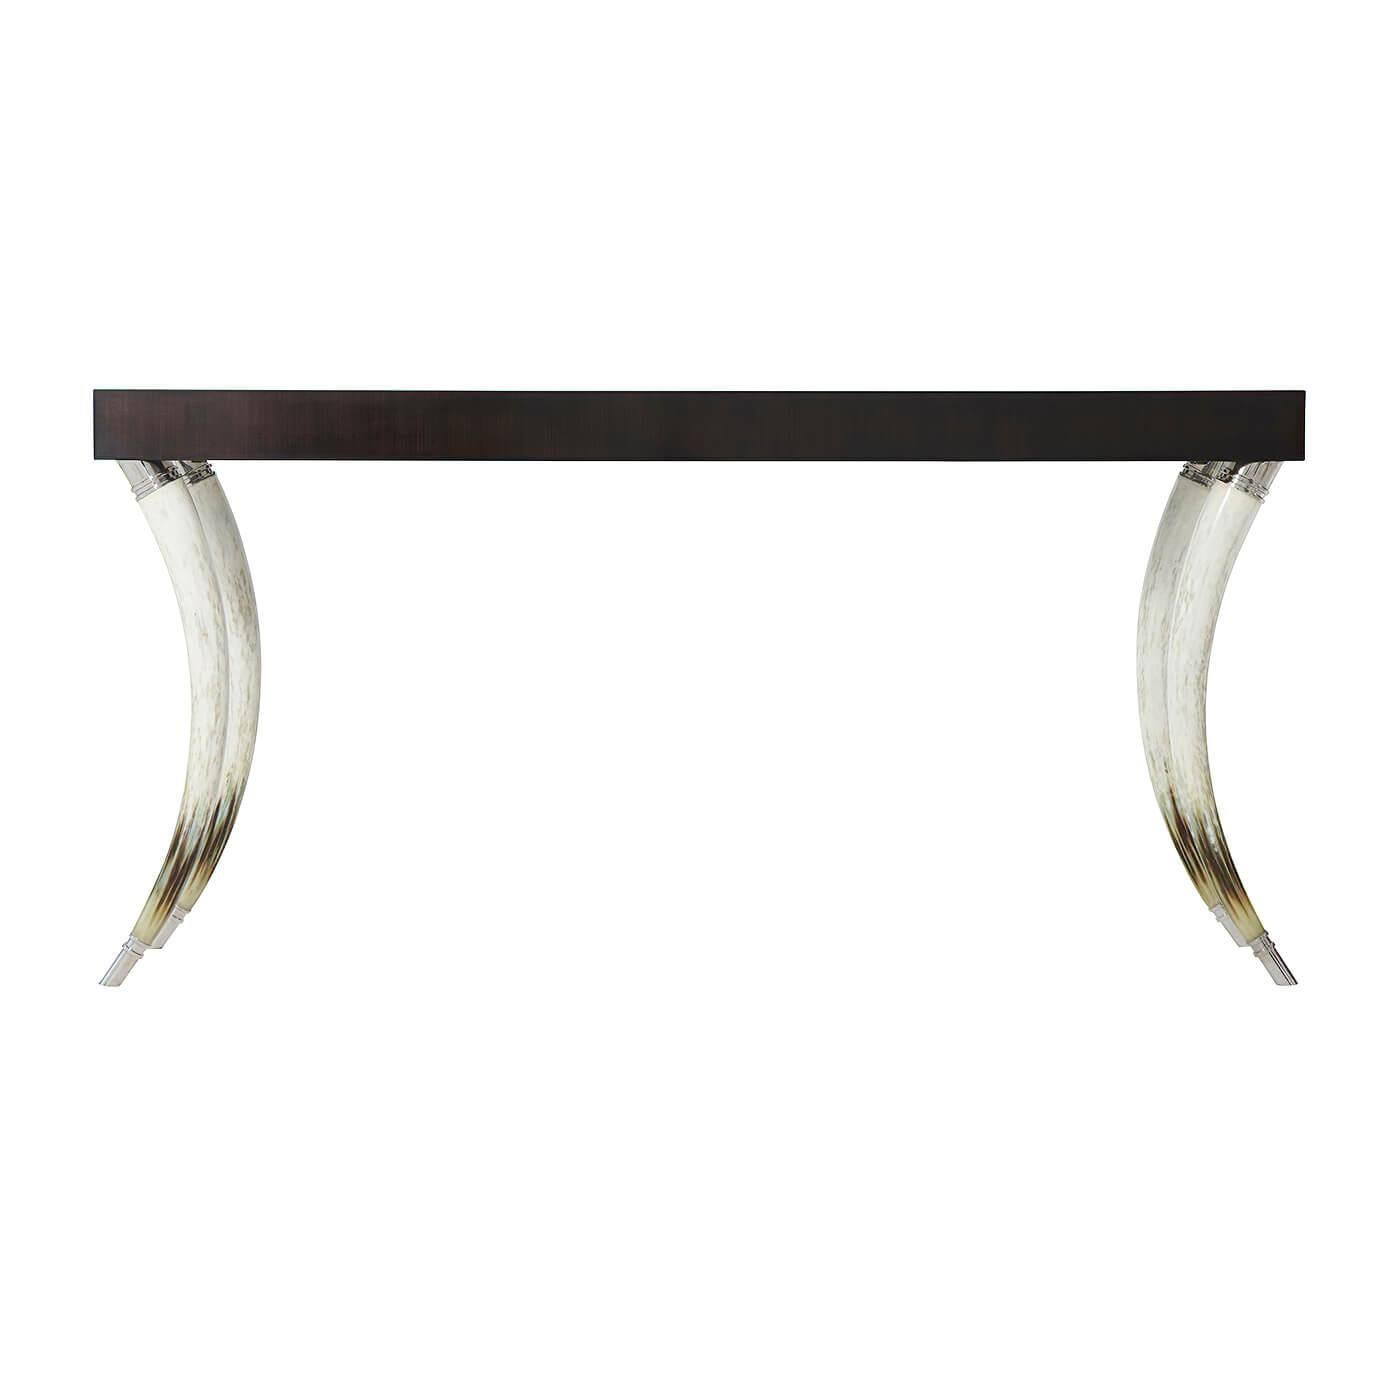 A modern ebonized Hyedua veneered and faux horn console table, the thick rectangular top on curved naturalistically hand-painted faux horn legs with stainless steel capitals and feet.

Dimensions: 64